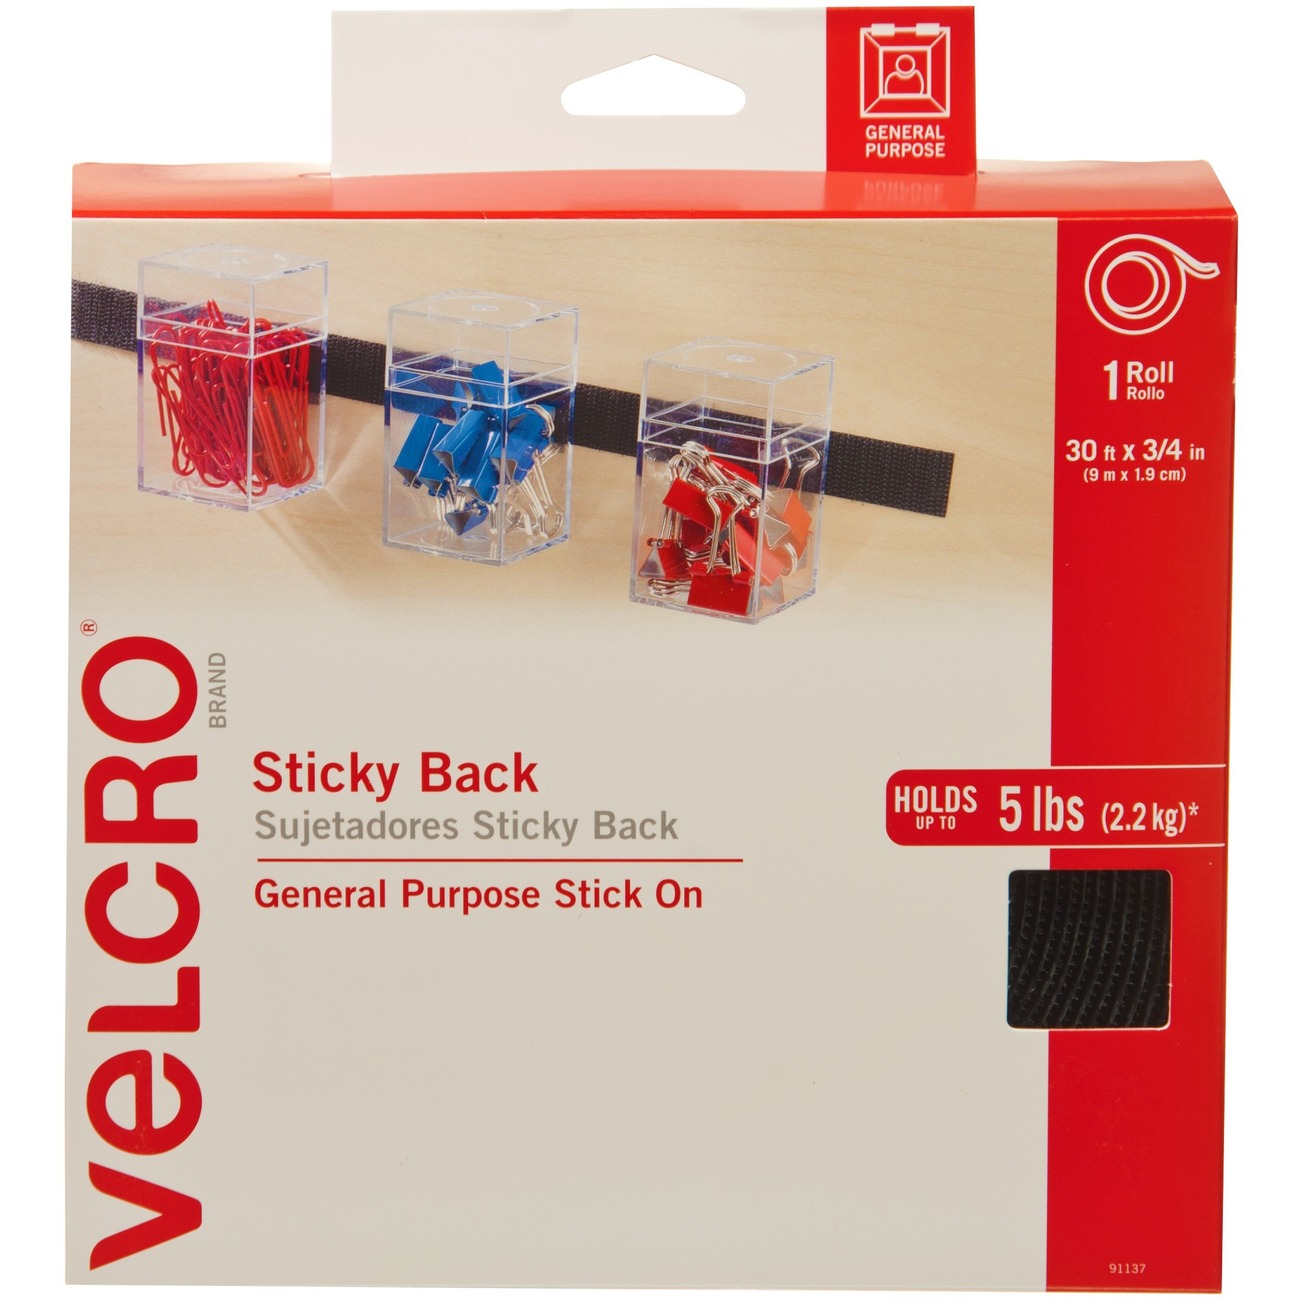 Self Adhesive Velkro Strips For Wall Mounting 30 Pcs Industrial Strength  Sticky Back Fastener Tape For Mounting Home Accessories